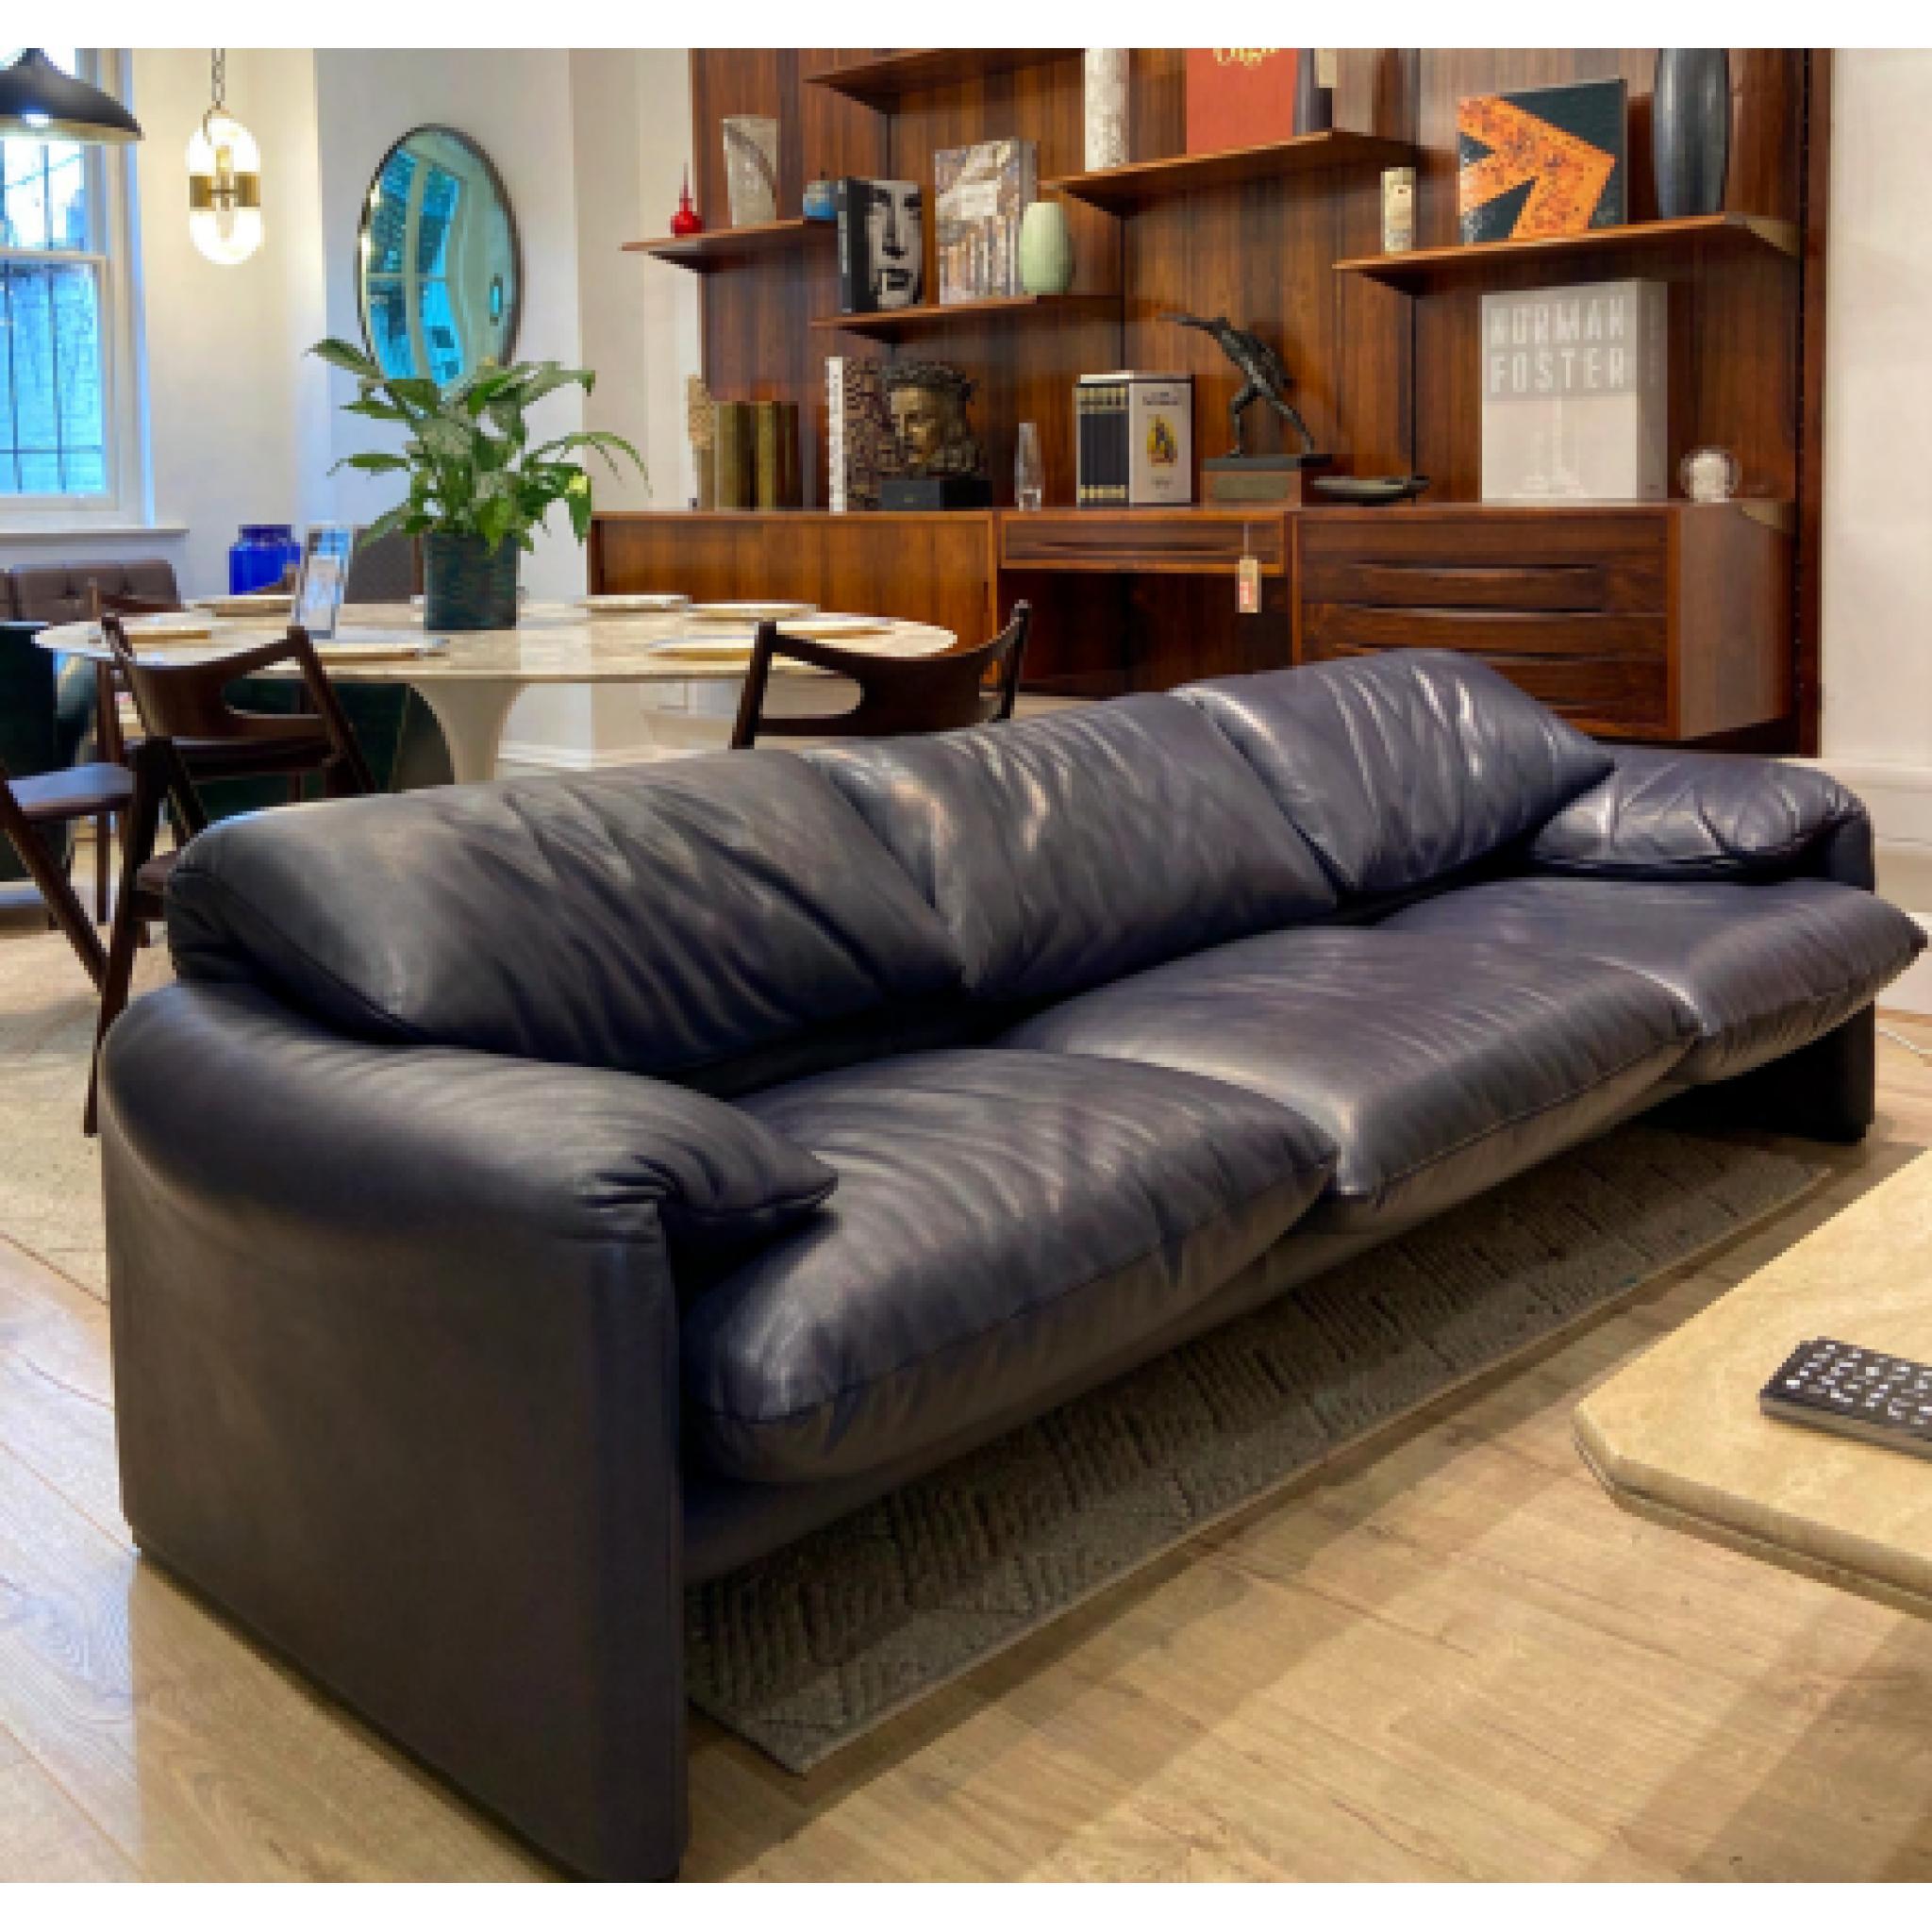 Three seater 'Maralunga Sofa By Vico Magistretti For Cassina in Navy Leather 

The Maralunga sofa was created in 1973 by Vico Magistretti for the Italian firm Cassina.

Known for his creations using simple, essential forms and the use of innovative